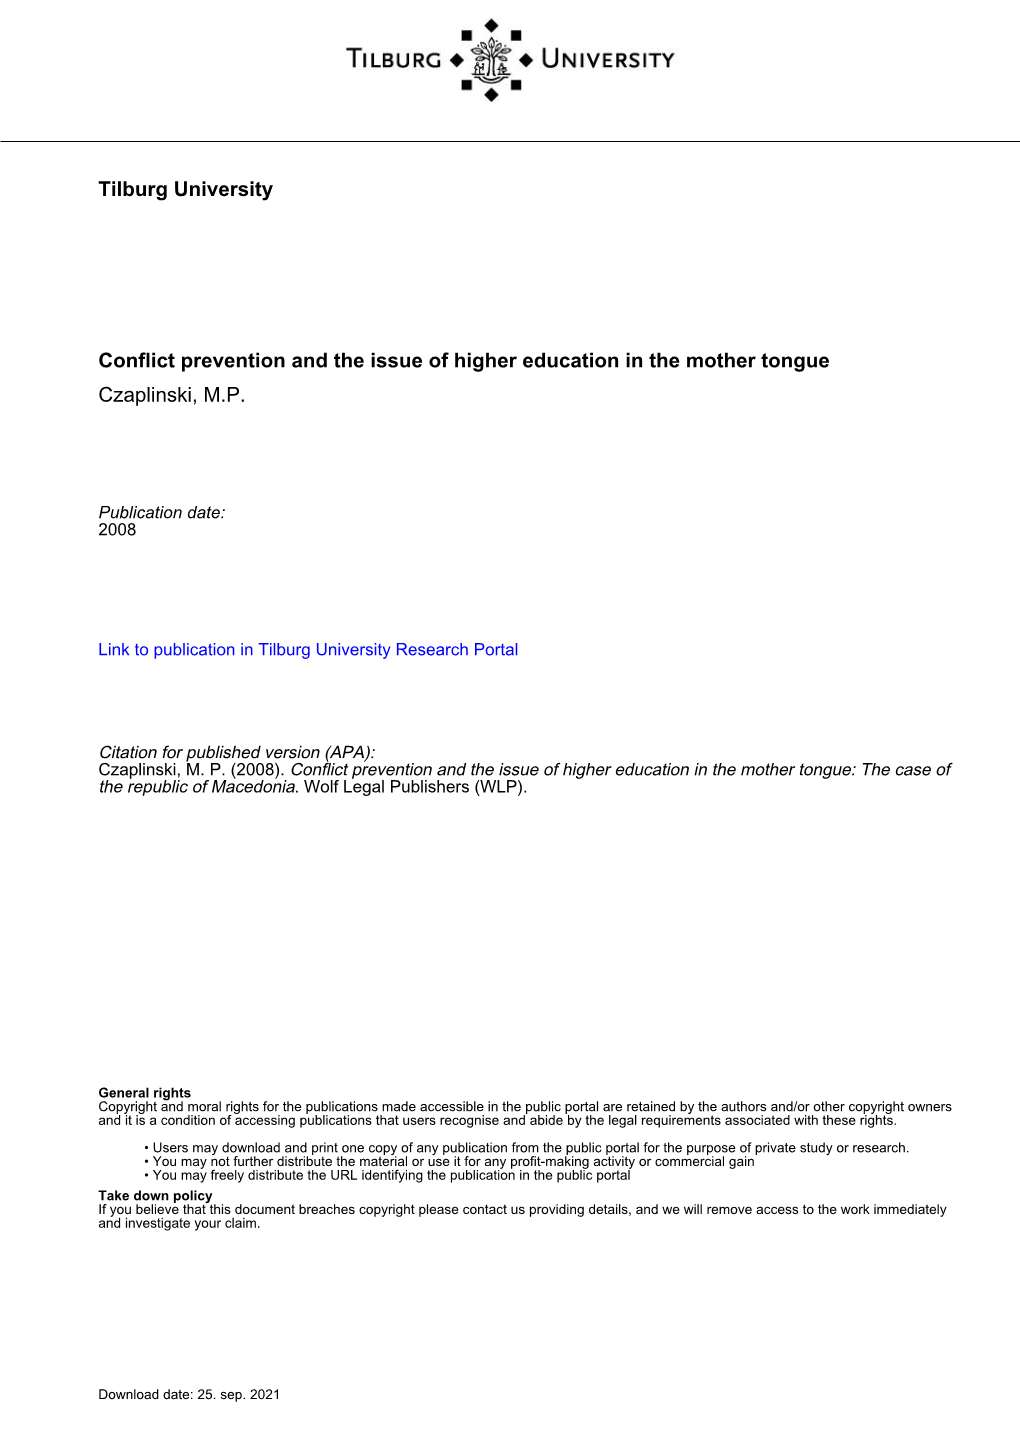 Tilburg University Conflict Prevention and the Issue of Higher Education In